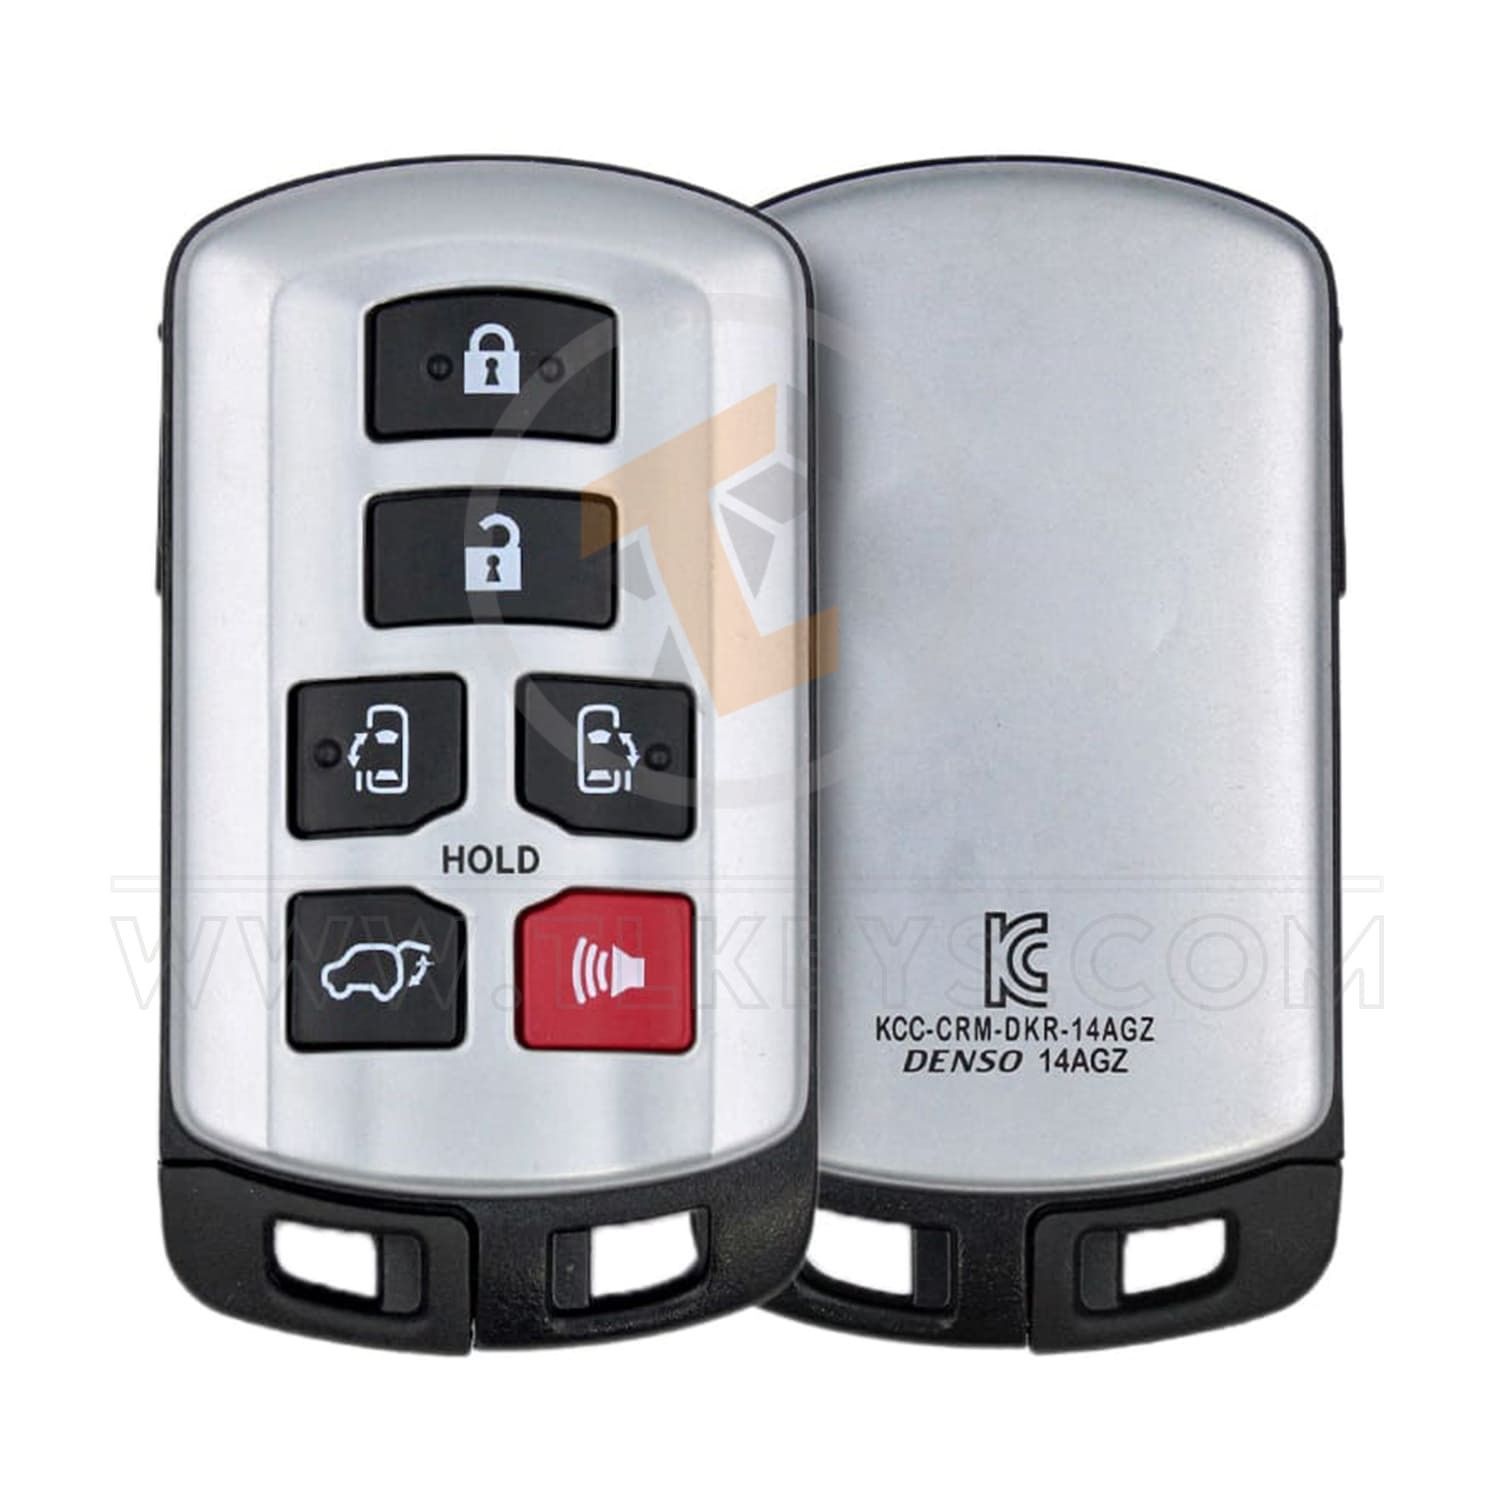 Toyota Sienna 2011-2017 Smart Key Remote Shell 6 Buttons Aftermarket Panic Button Yes